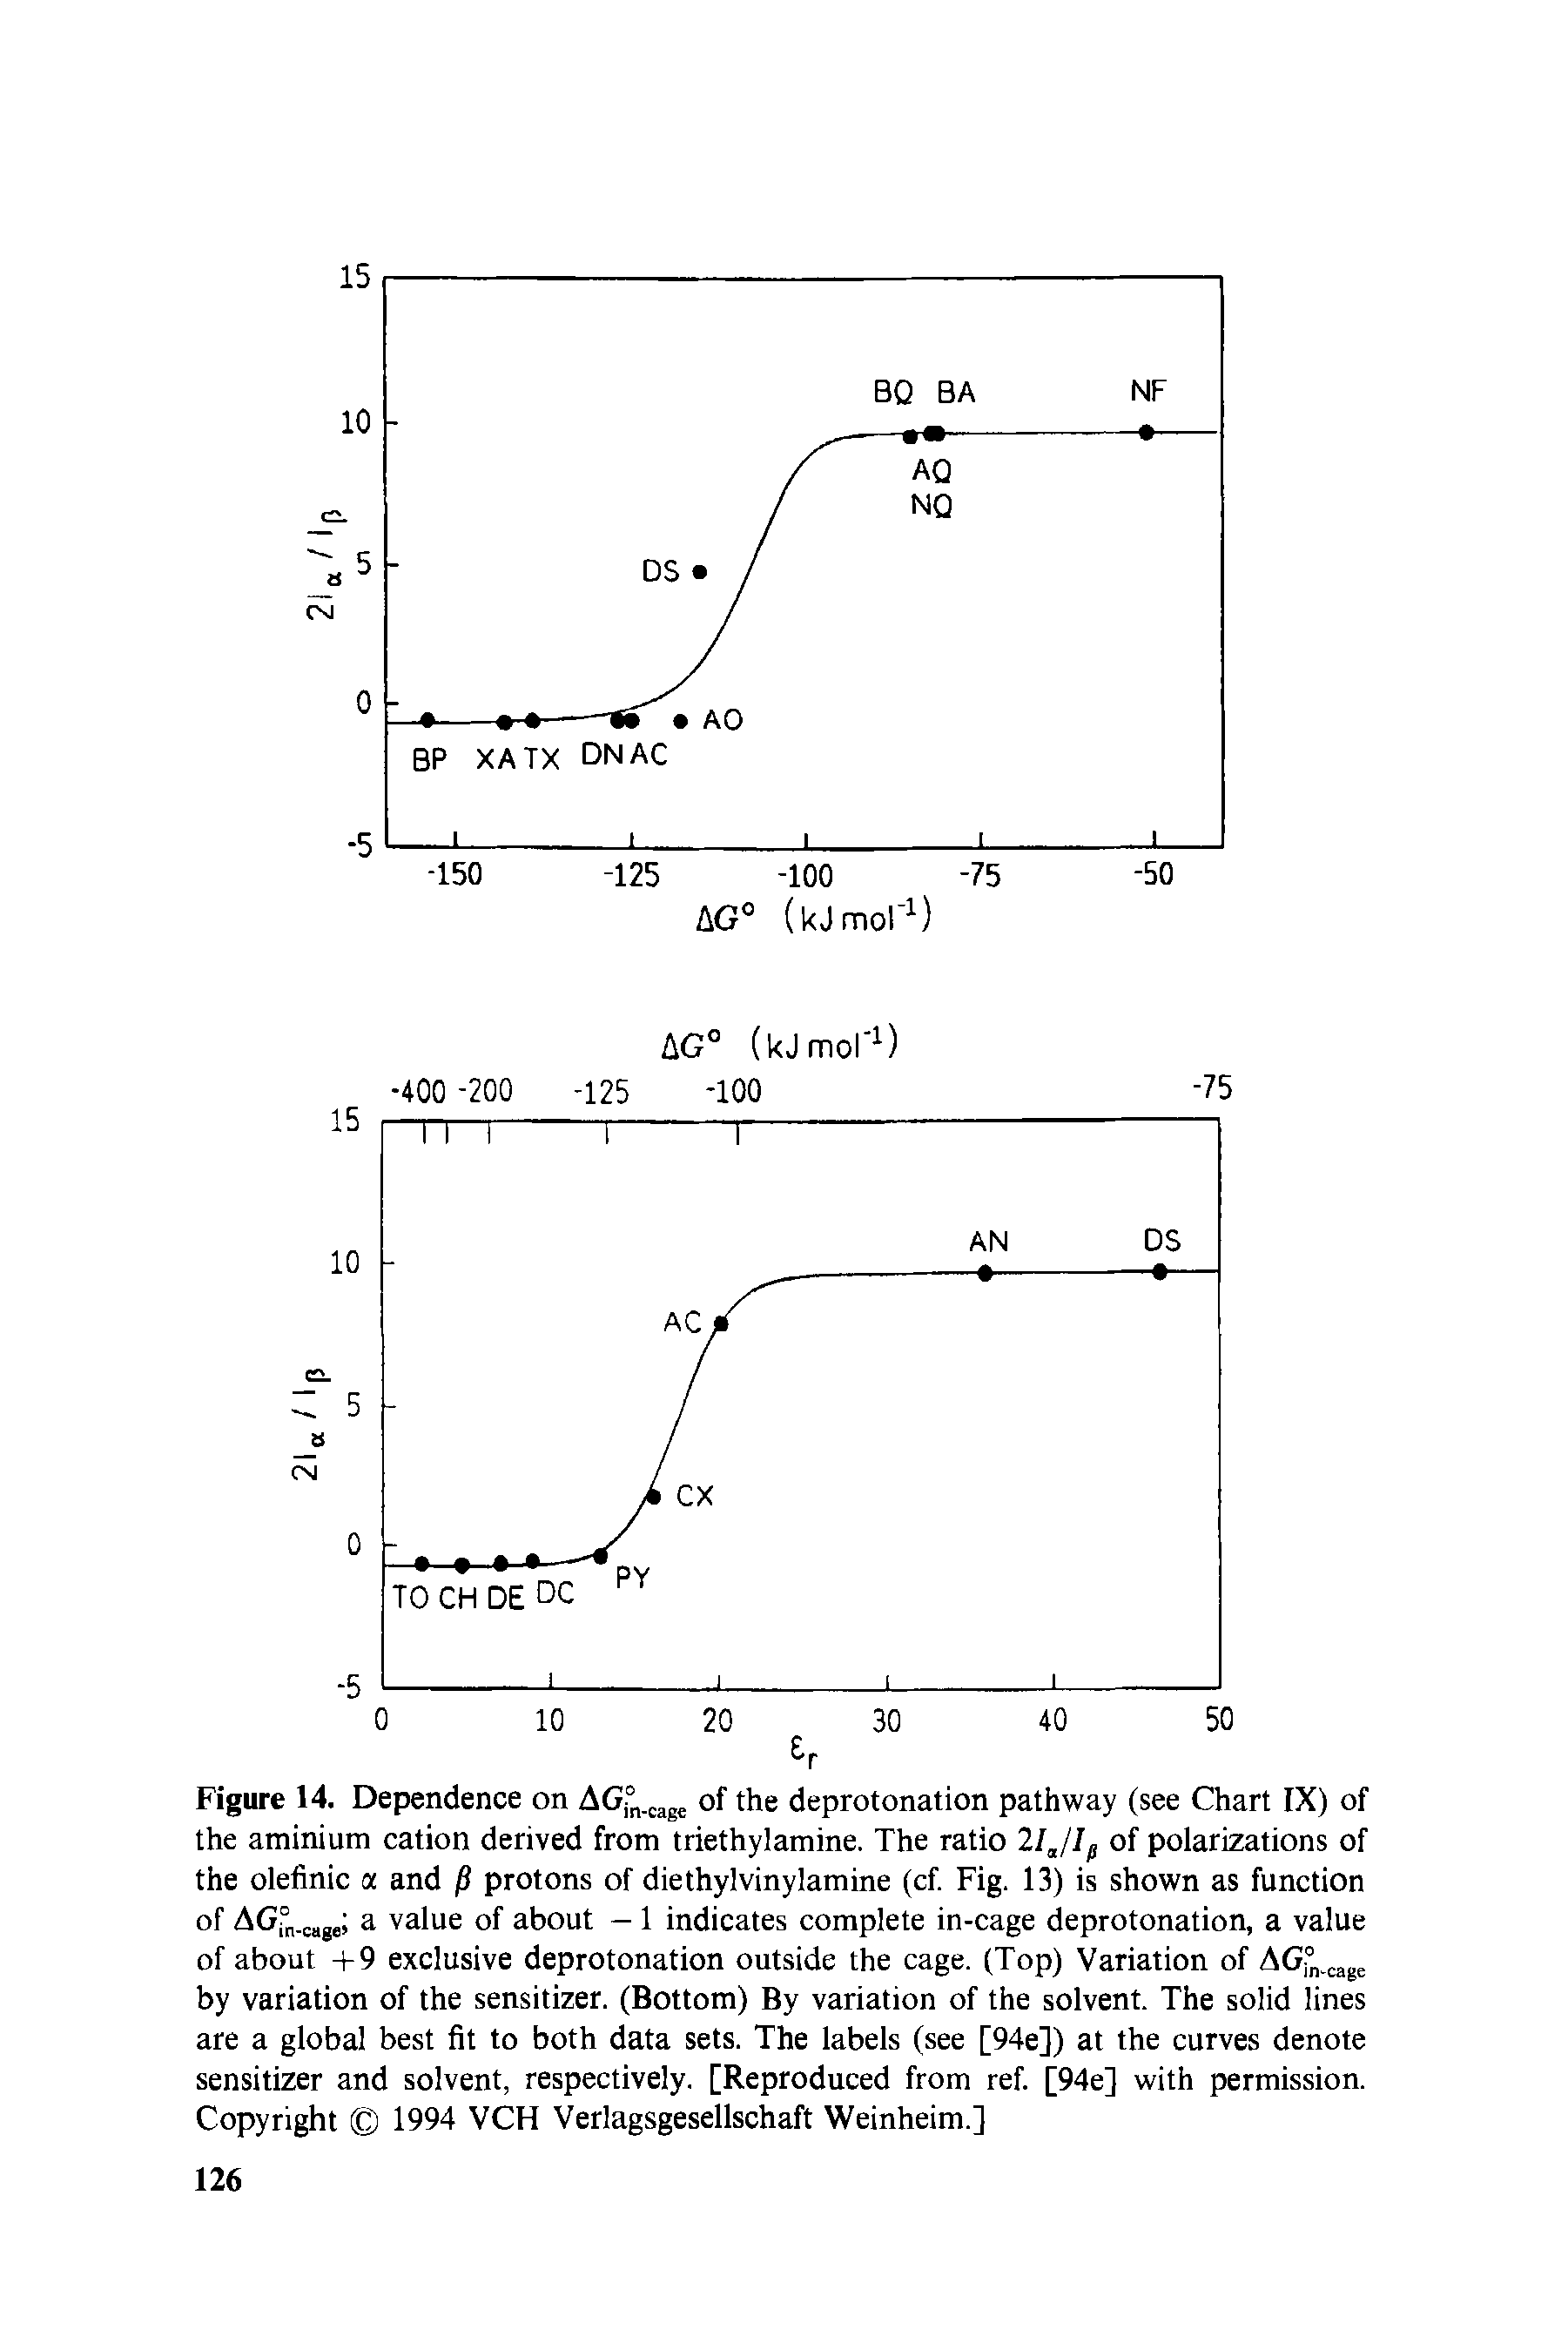 Figure 14. Dependence on AG°n.cage of the deprotonation pathway (see Chart IX) of the aminium cation derived from triethylamine. The ratio 2IJIf of polarizations of the olefinic a and j8 protons of diethylvinylamine (cf. Fig. 13) is shown as function of AG°, cage a value of about — 1 indicates complete in-cage deprotonation, a value of about +9 exclusive deprotonation outside the cage. (Top) Variation of AG ., . by variation of the sensitizer. (Bottom) By variation of the solvent. The solid lines are a global best fit to both data sets. The labels (see [94e]) at the curves denote sensitizer and solvent, respectively. [Reproduced from ref. [94e] with permission. Copyright 1994 VCH Verlagsgesellschaft Weinheim.]...